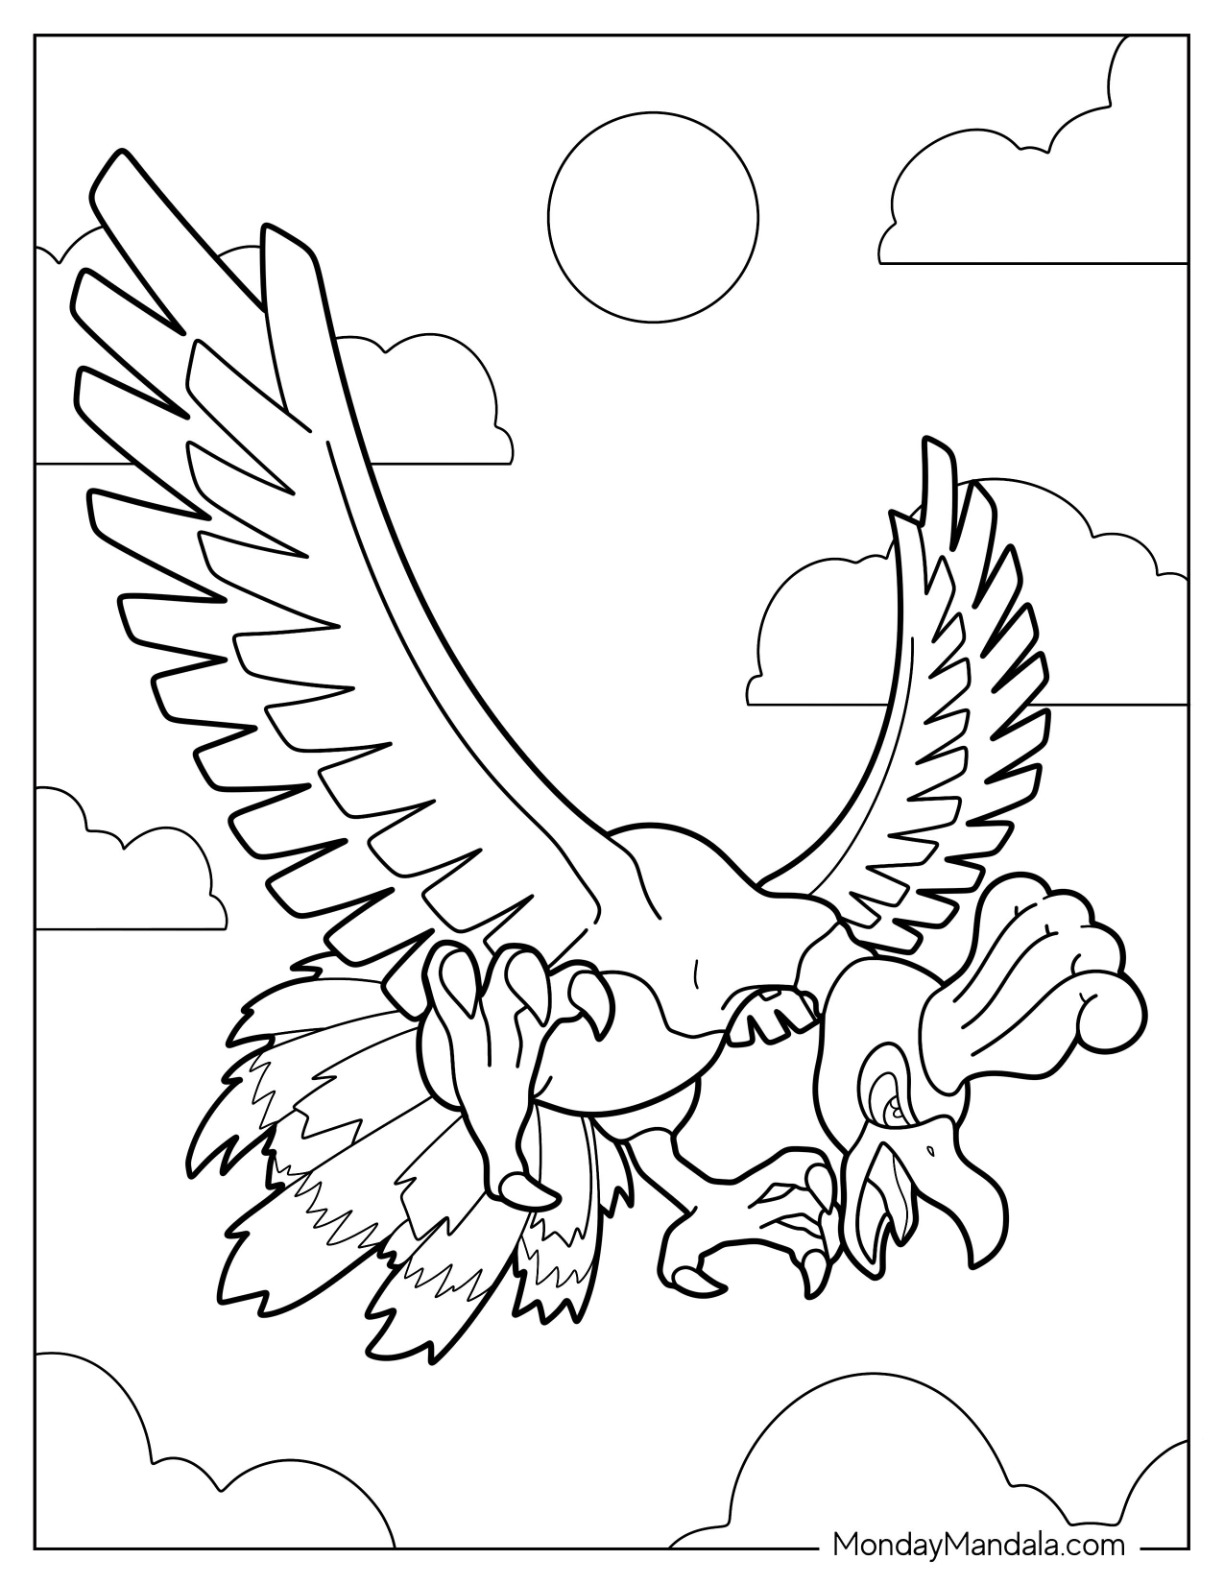 Legendary pokemon coloring pages free pdf printables